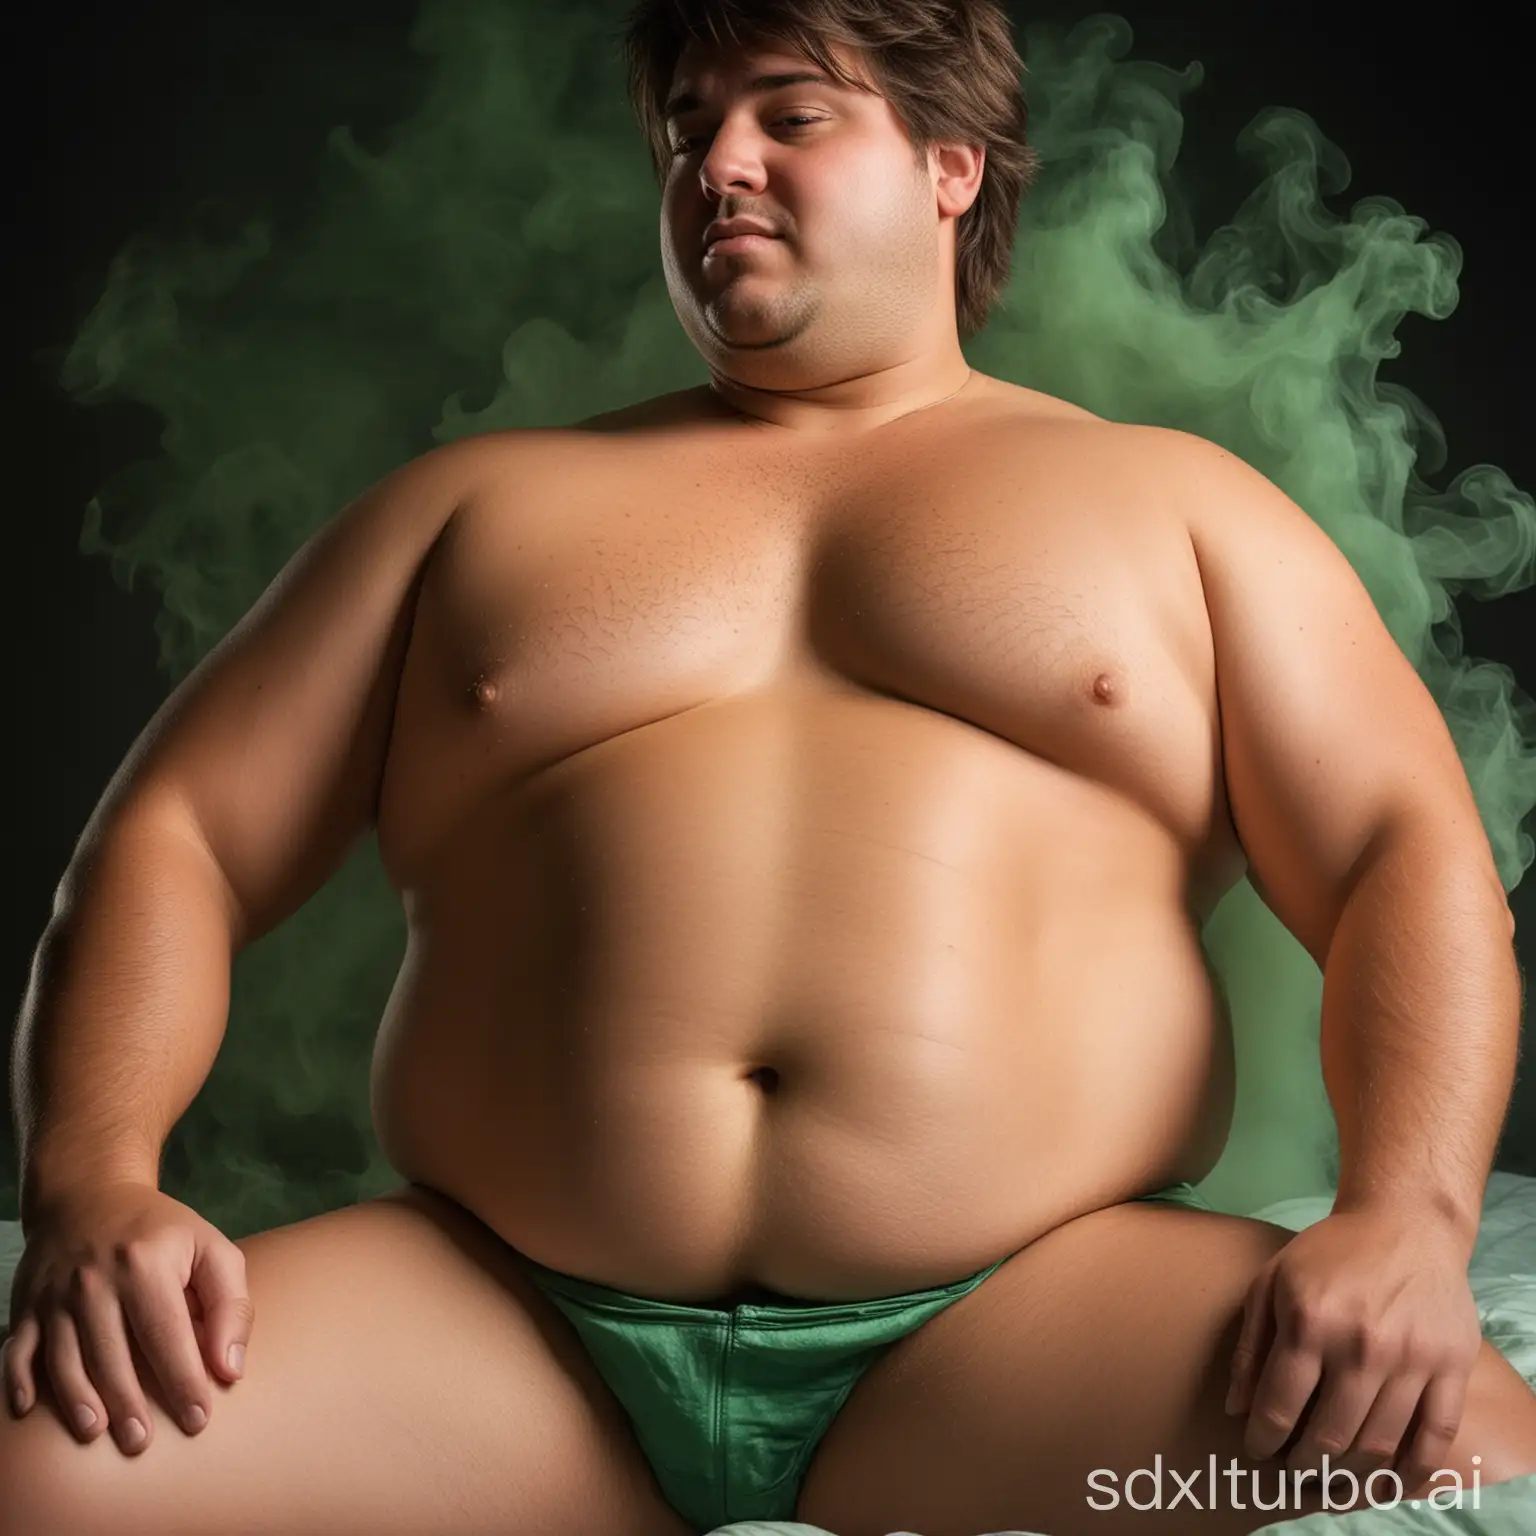 Close up, a belly of a tanned young chubby man, with mullet hair, spreeding green smoke to his back, in a bed, dark background